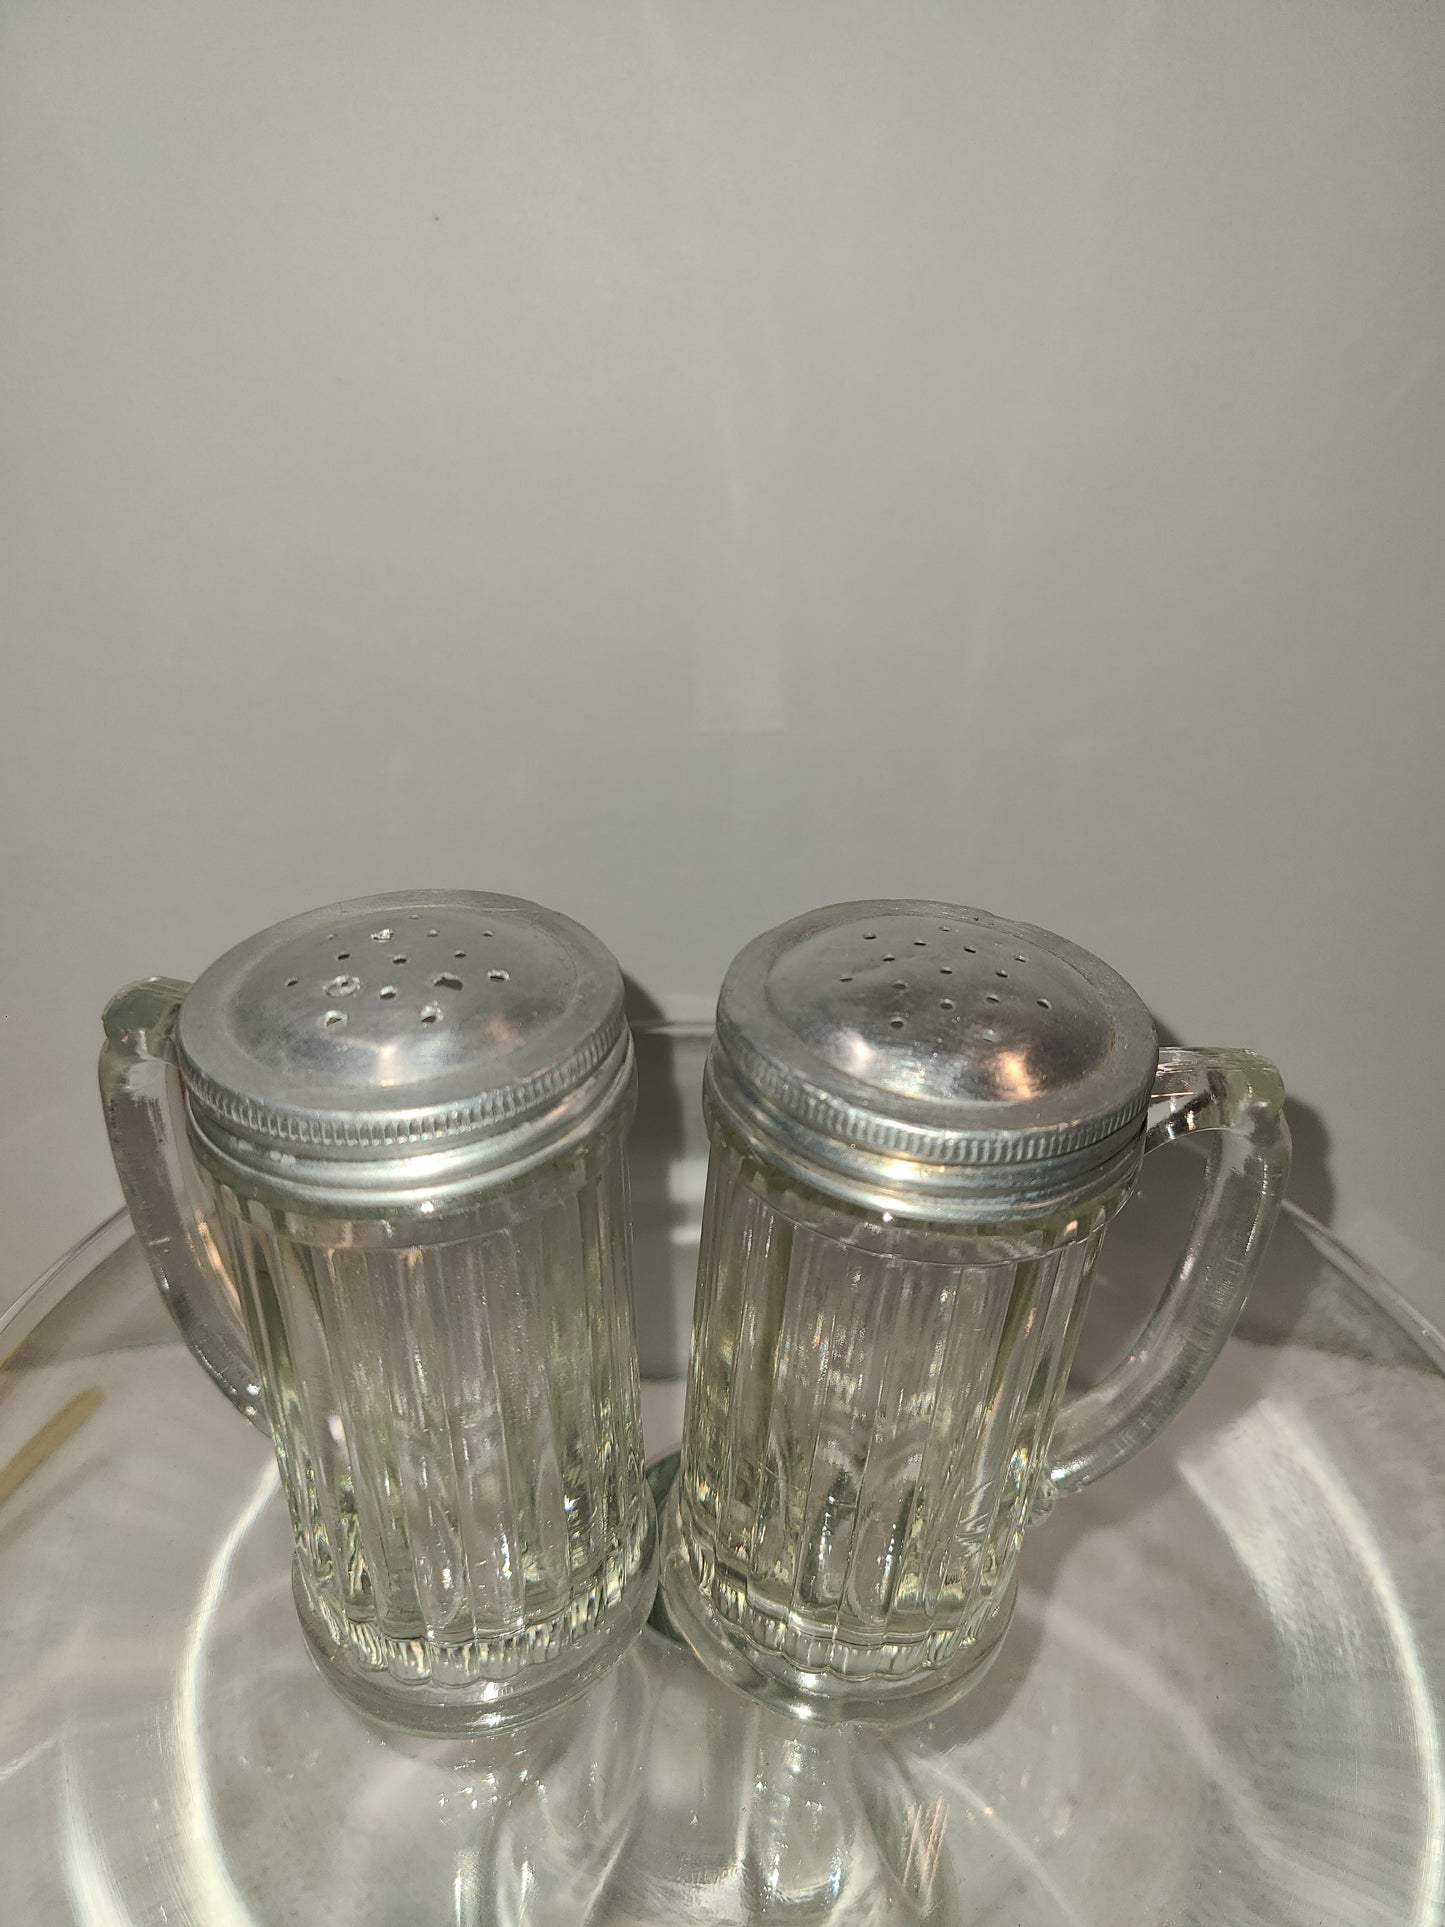 Vintage Glass and Metal Salt and Pepper Shakers